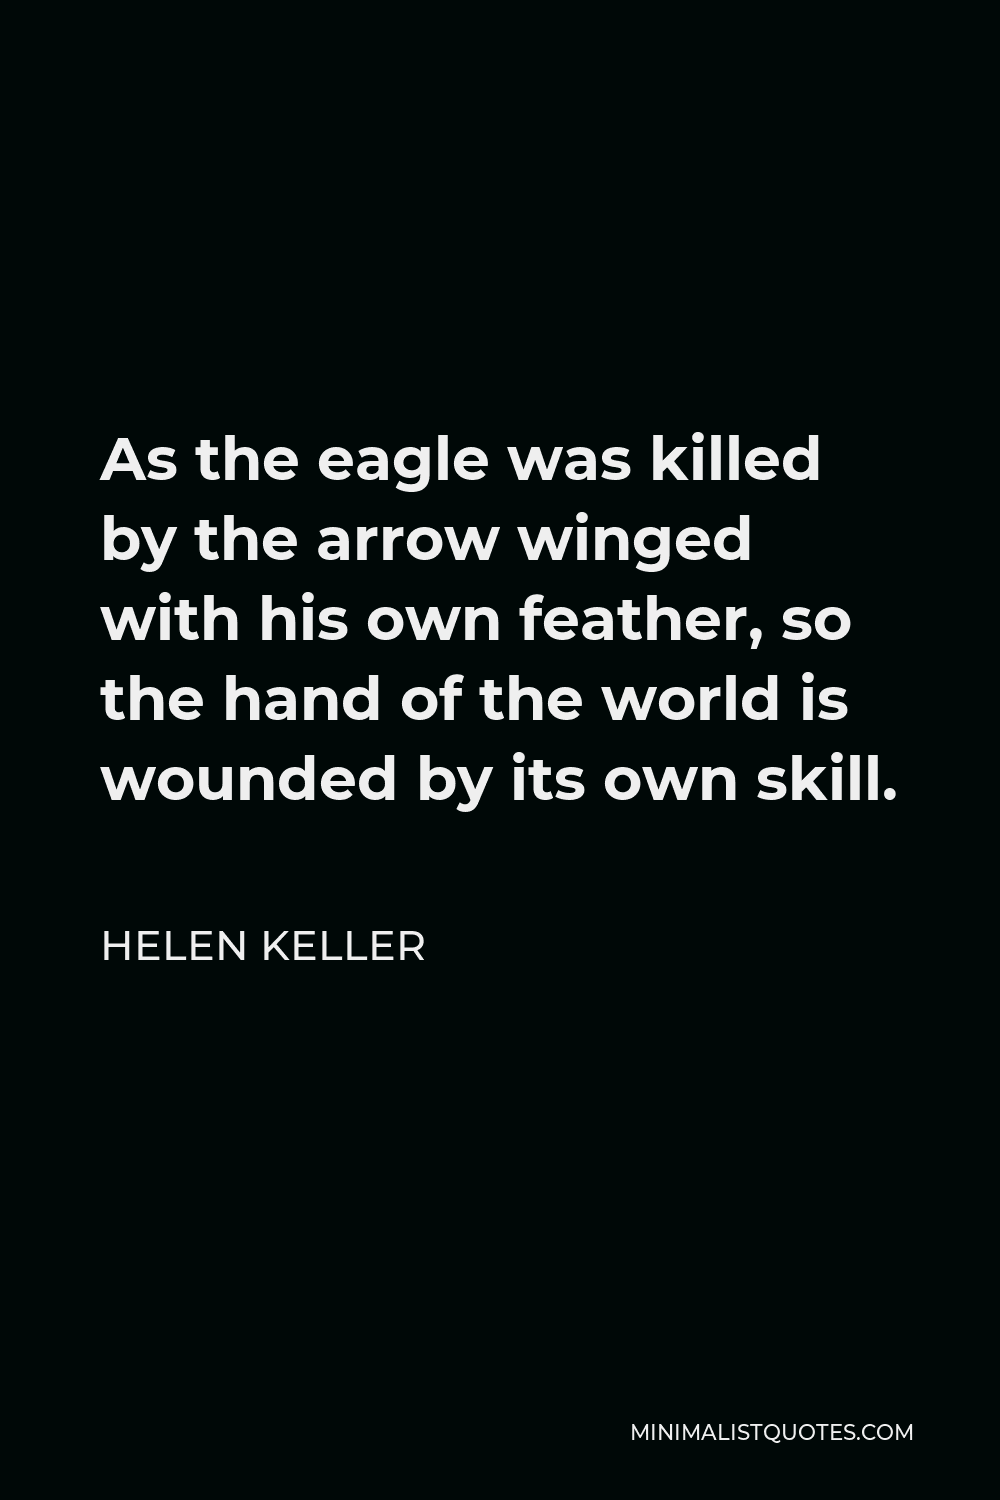 Helen Keller Quote - As the eagle was killed by the arrow winged with his own feather, so the hand of the world is wounded by its own skill.